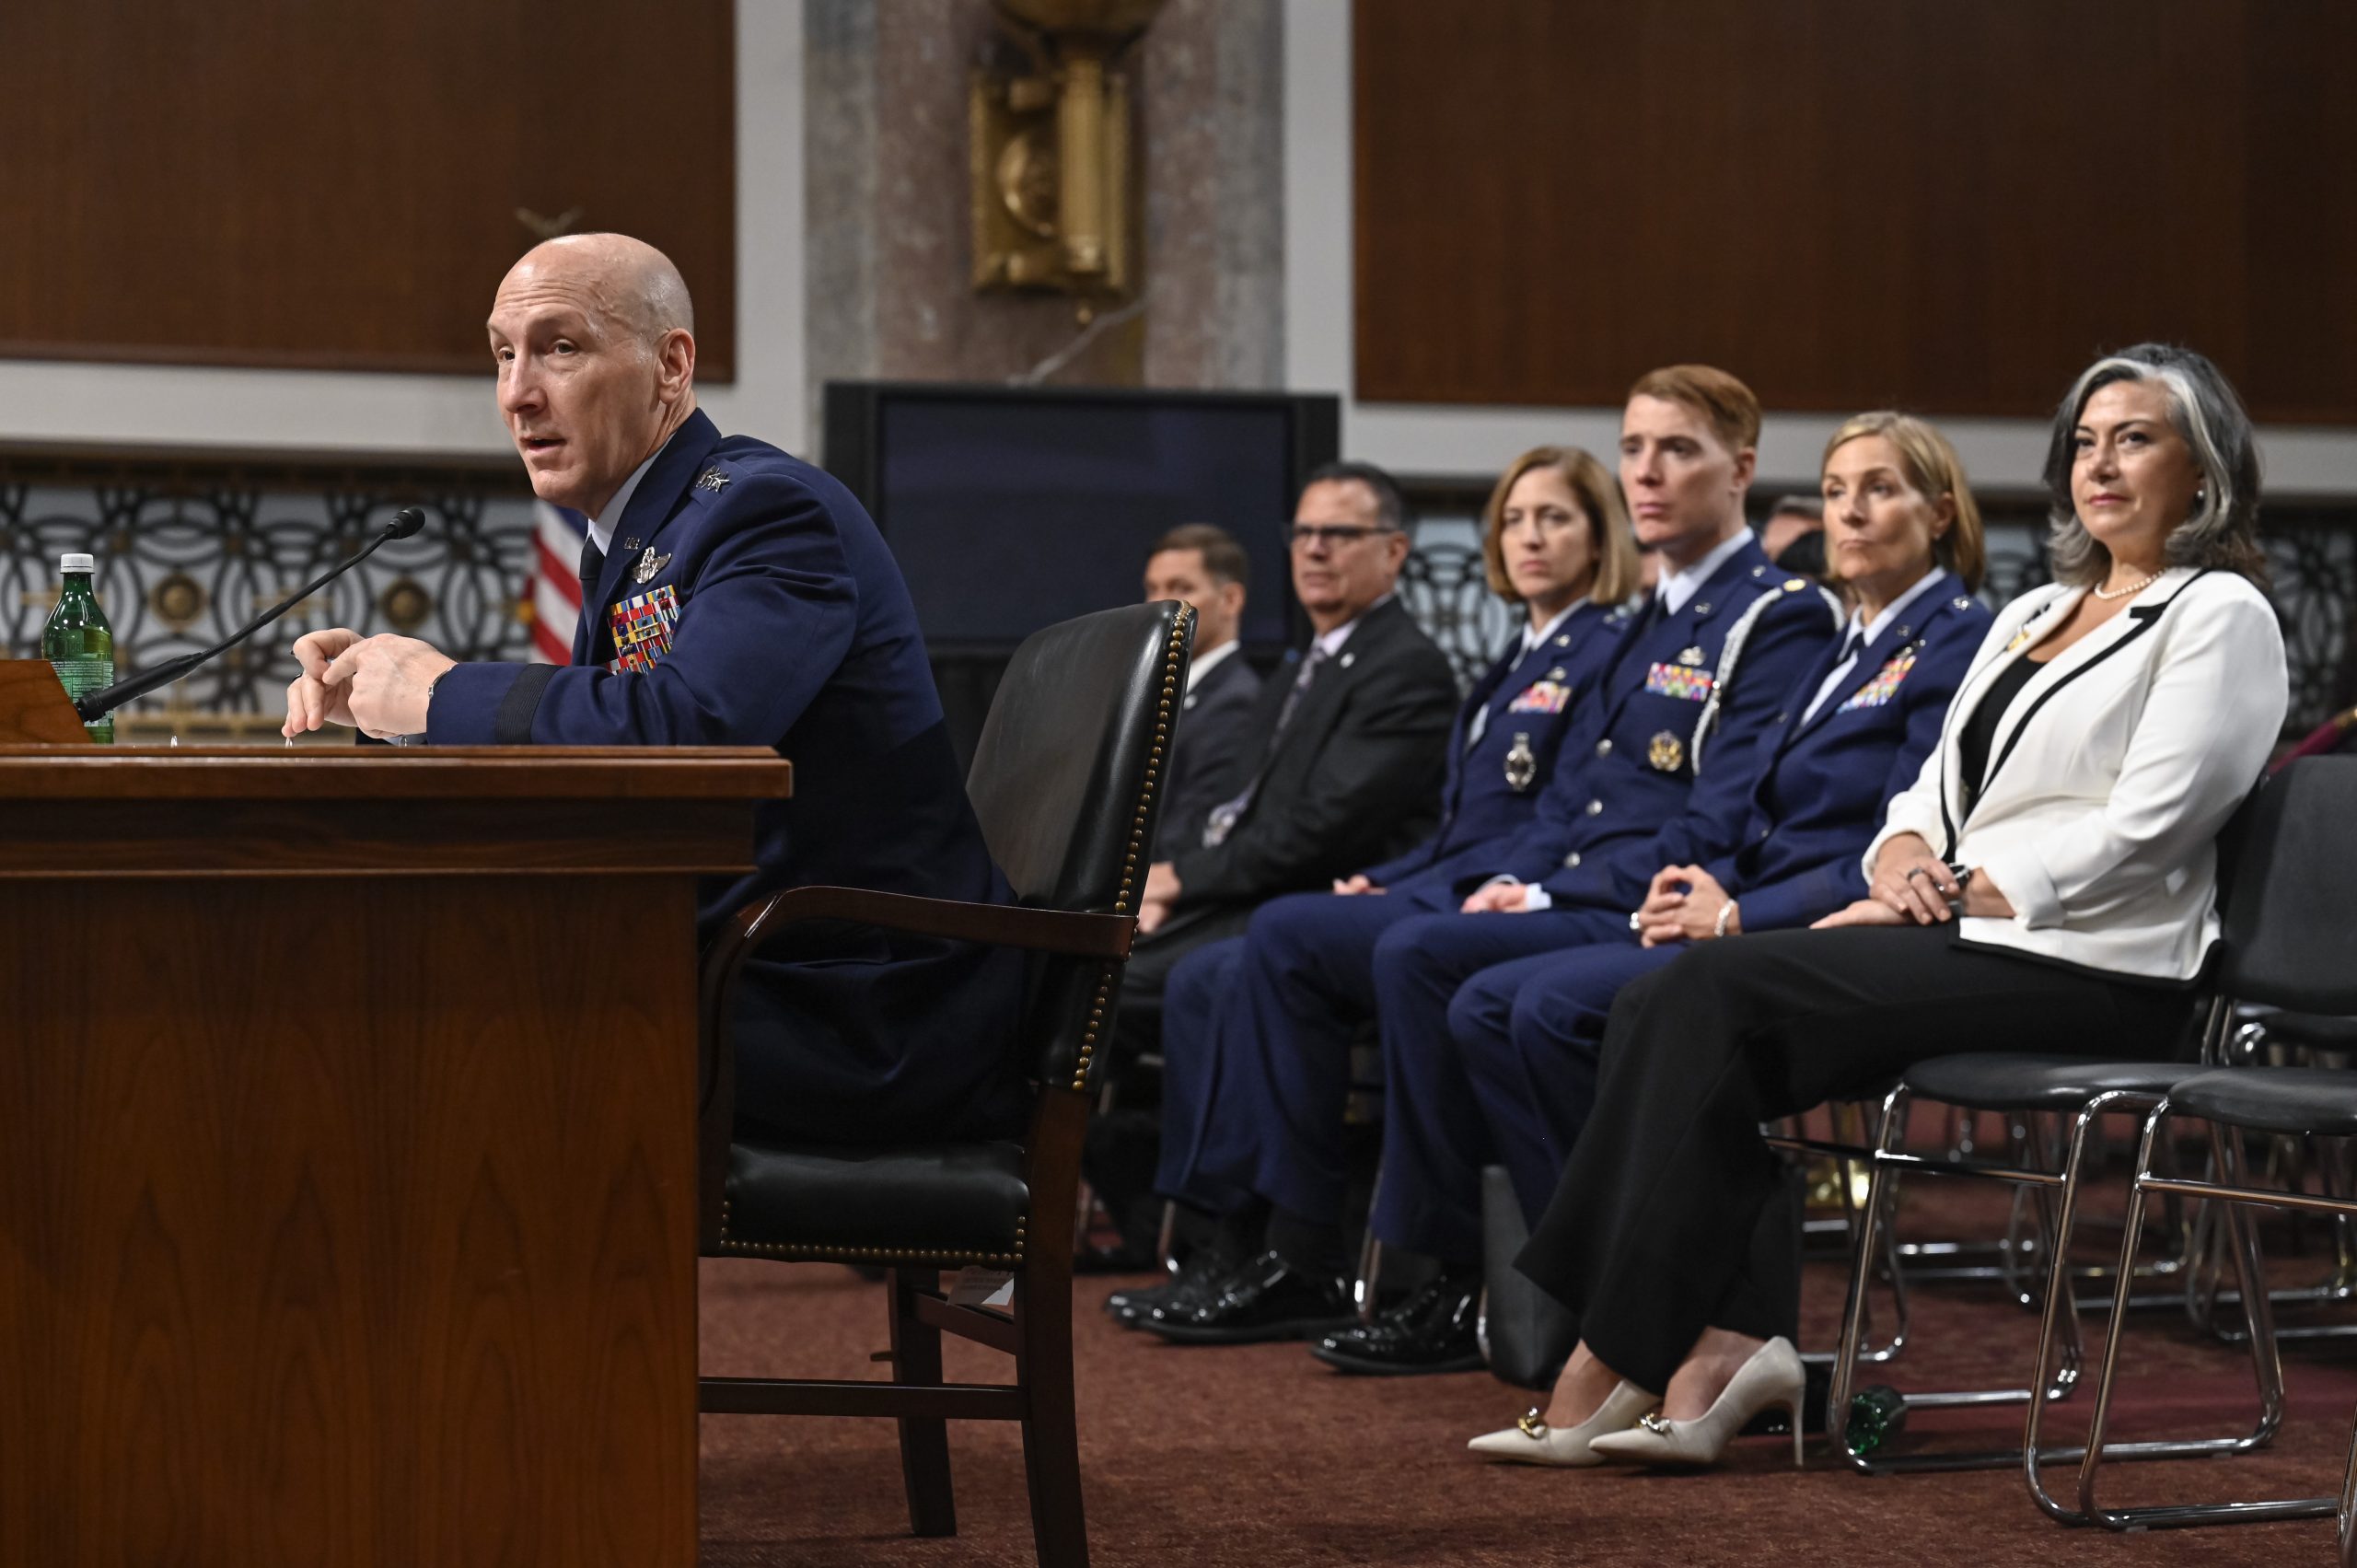 At Nomination Hearing, Allvin Says Chance to Be CSAF ‘Comes at a Very Important Time’